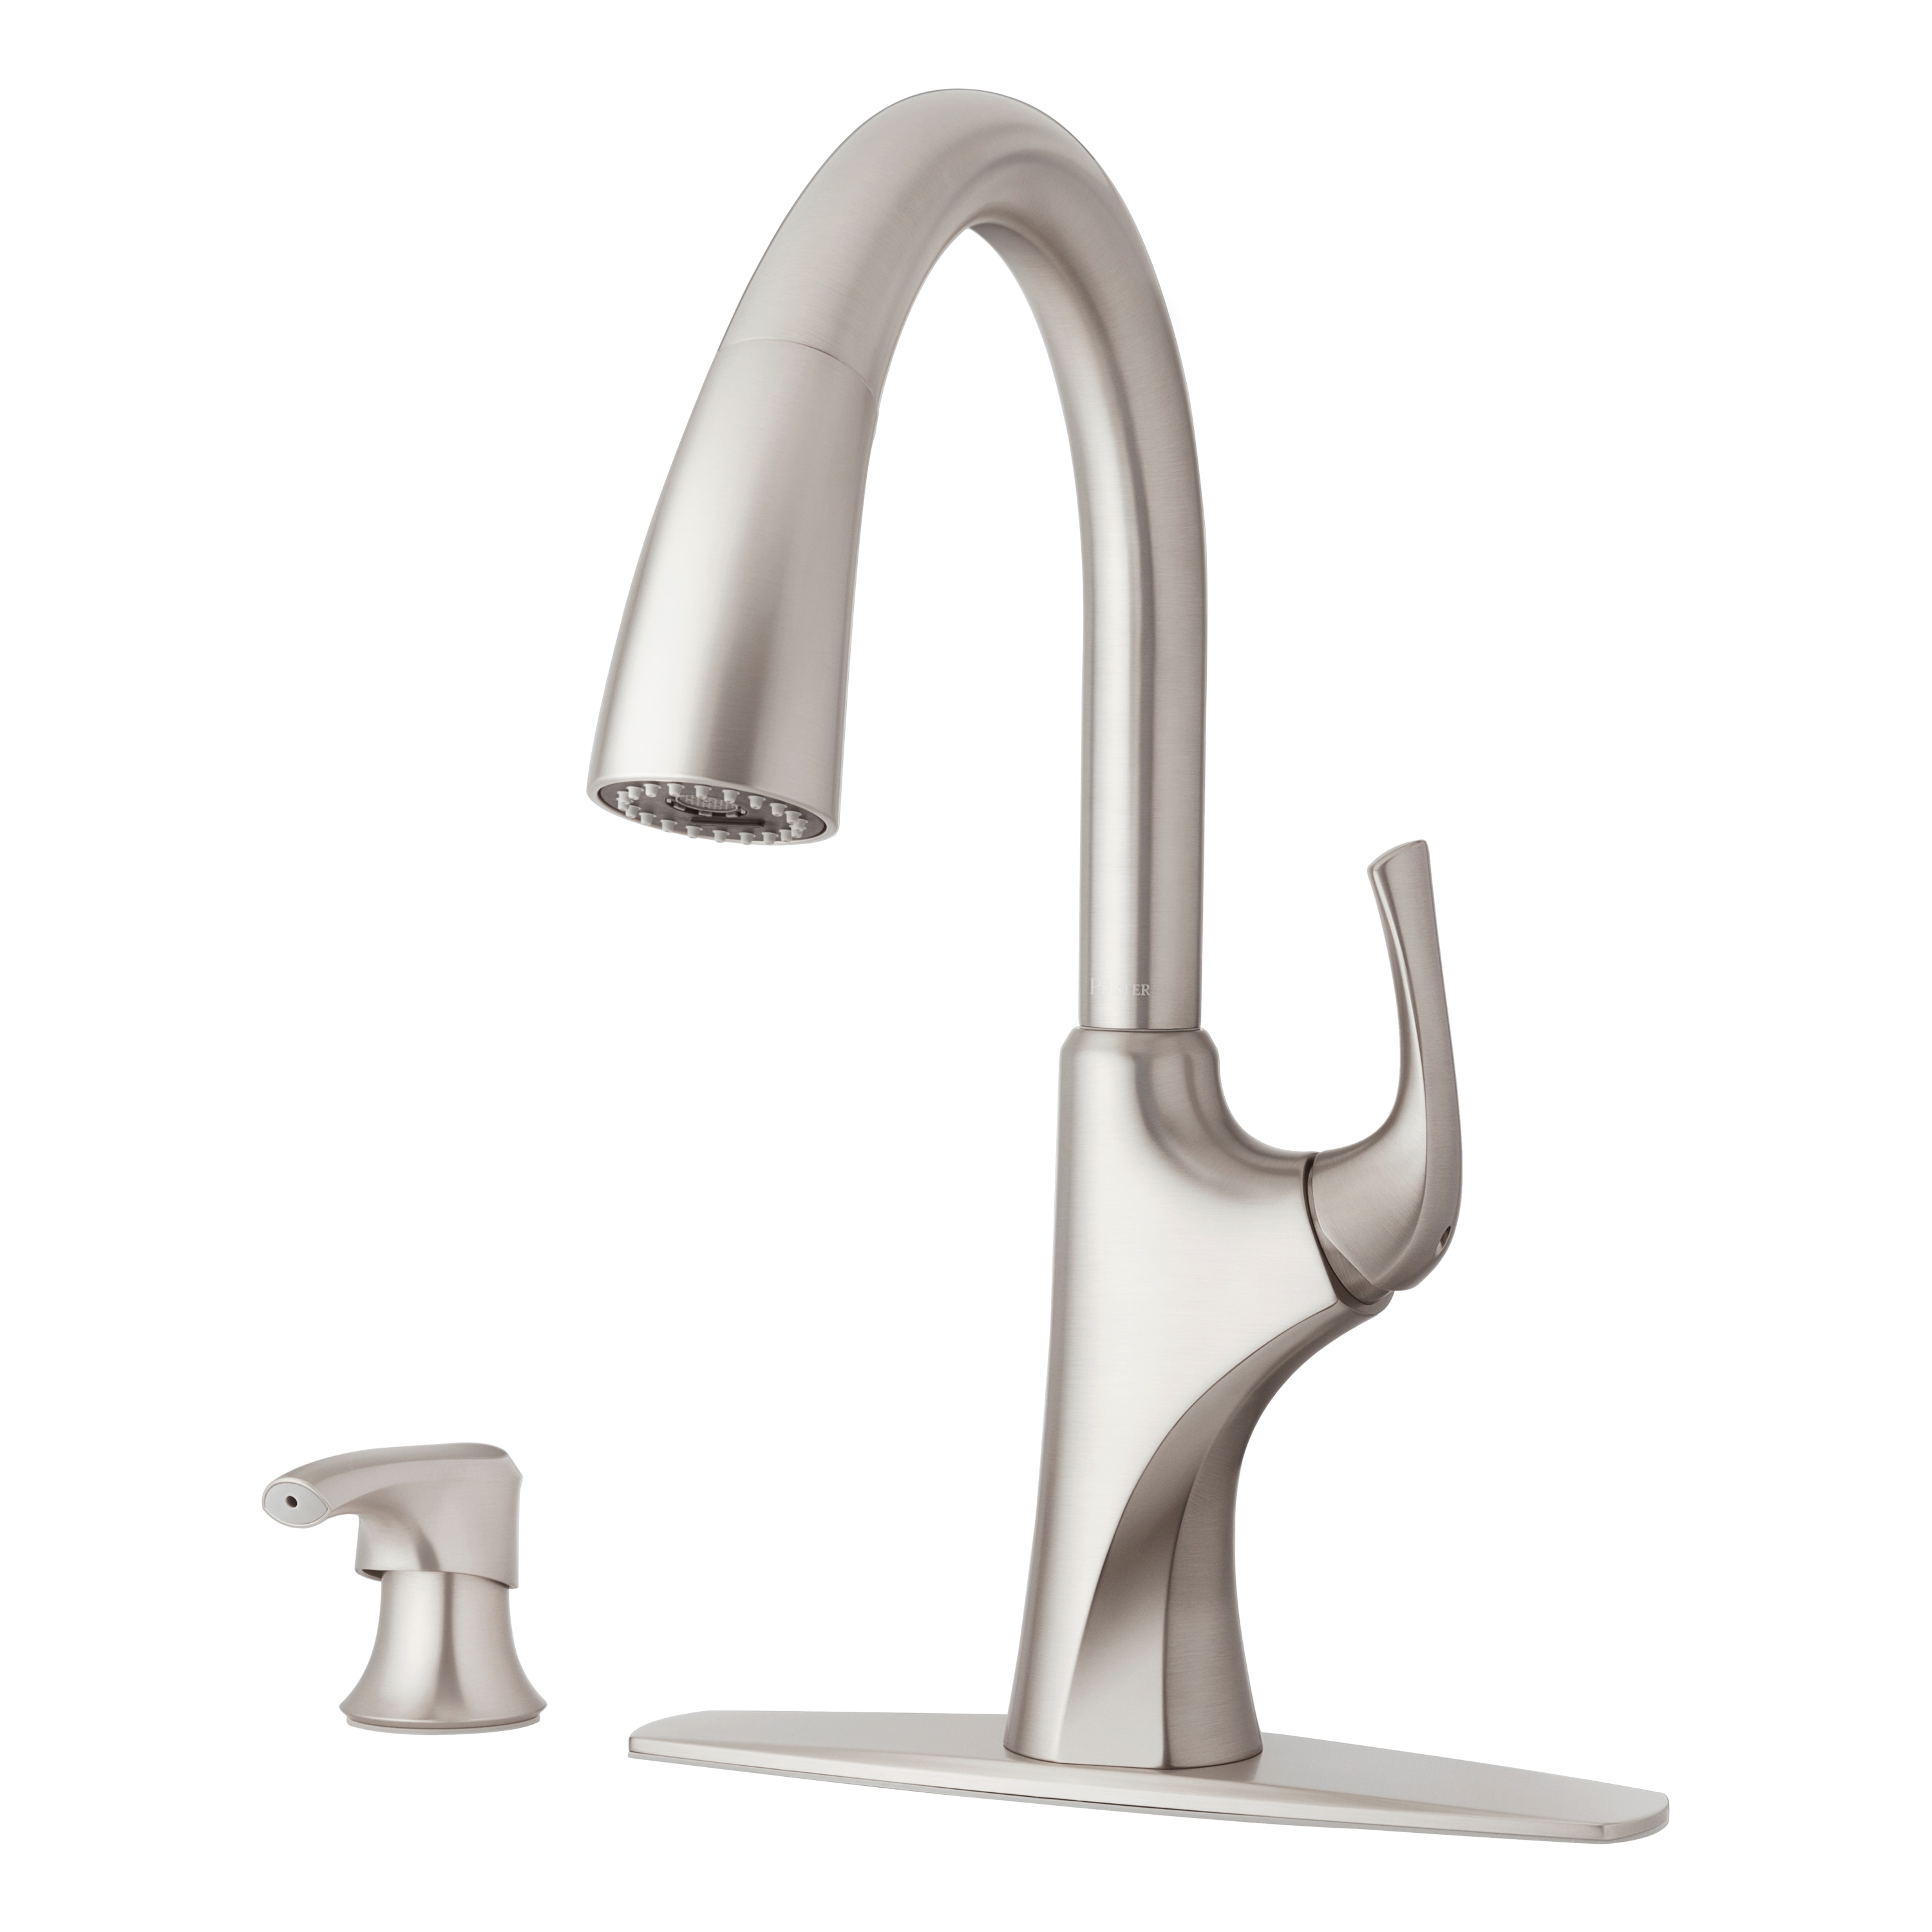 Rancho Stainless Steel Single Handle High-arc Kitchen Faucet with Deck Plate and Soap Dispenser Included | - Pfister F-529-7RCHGS